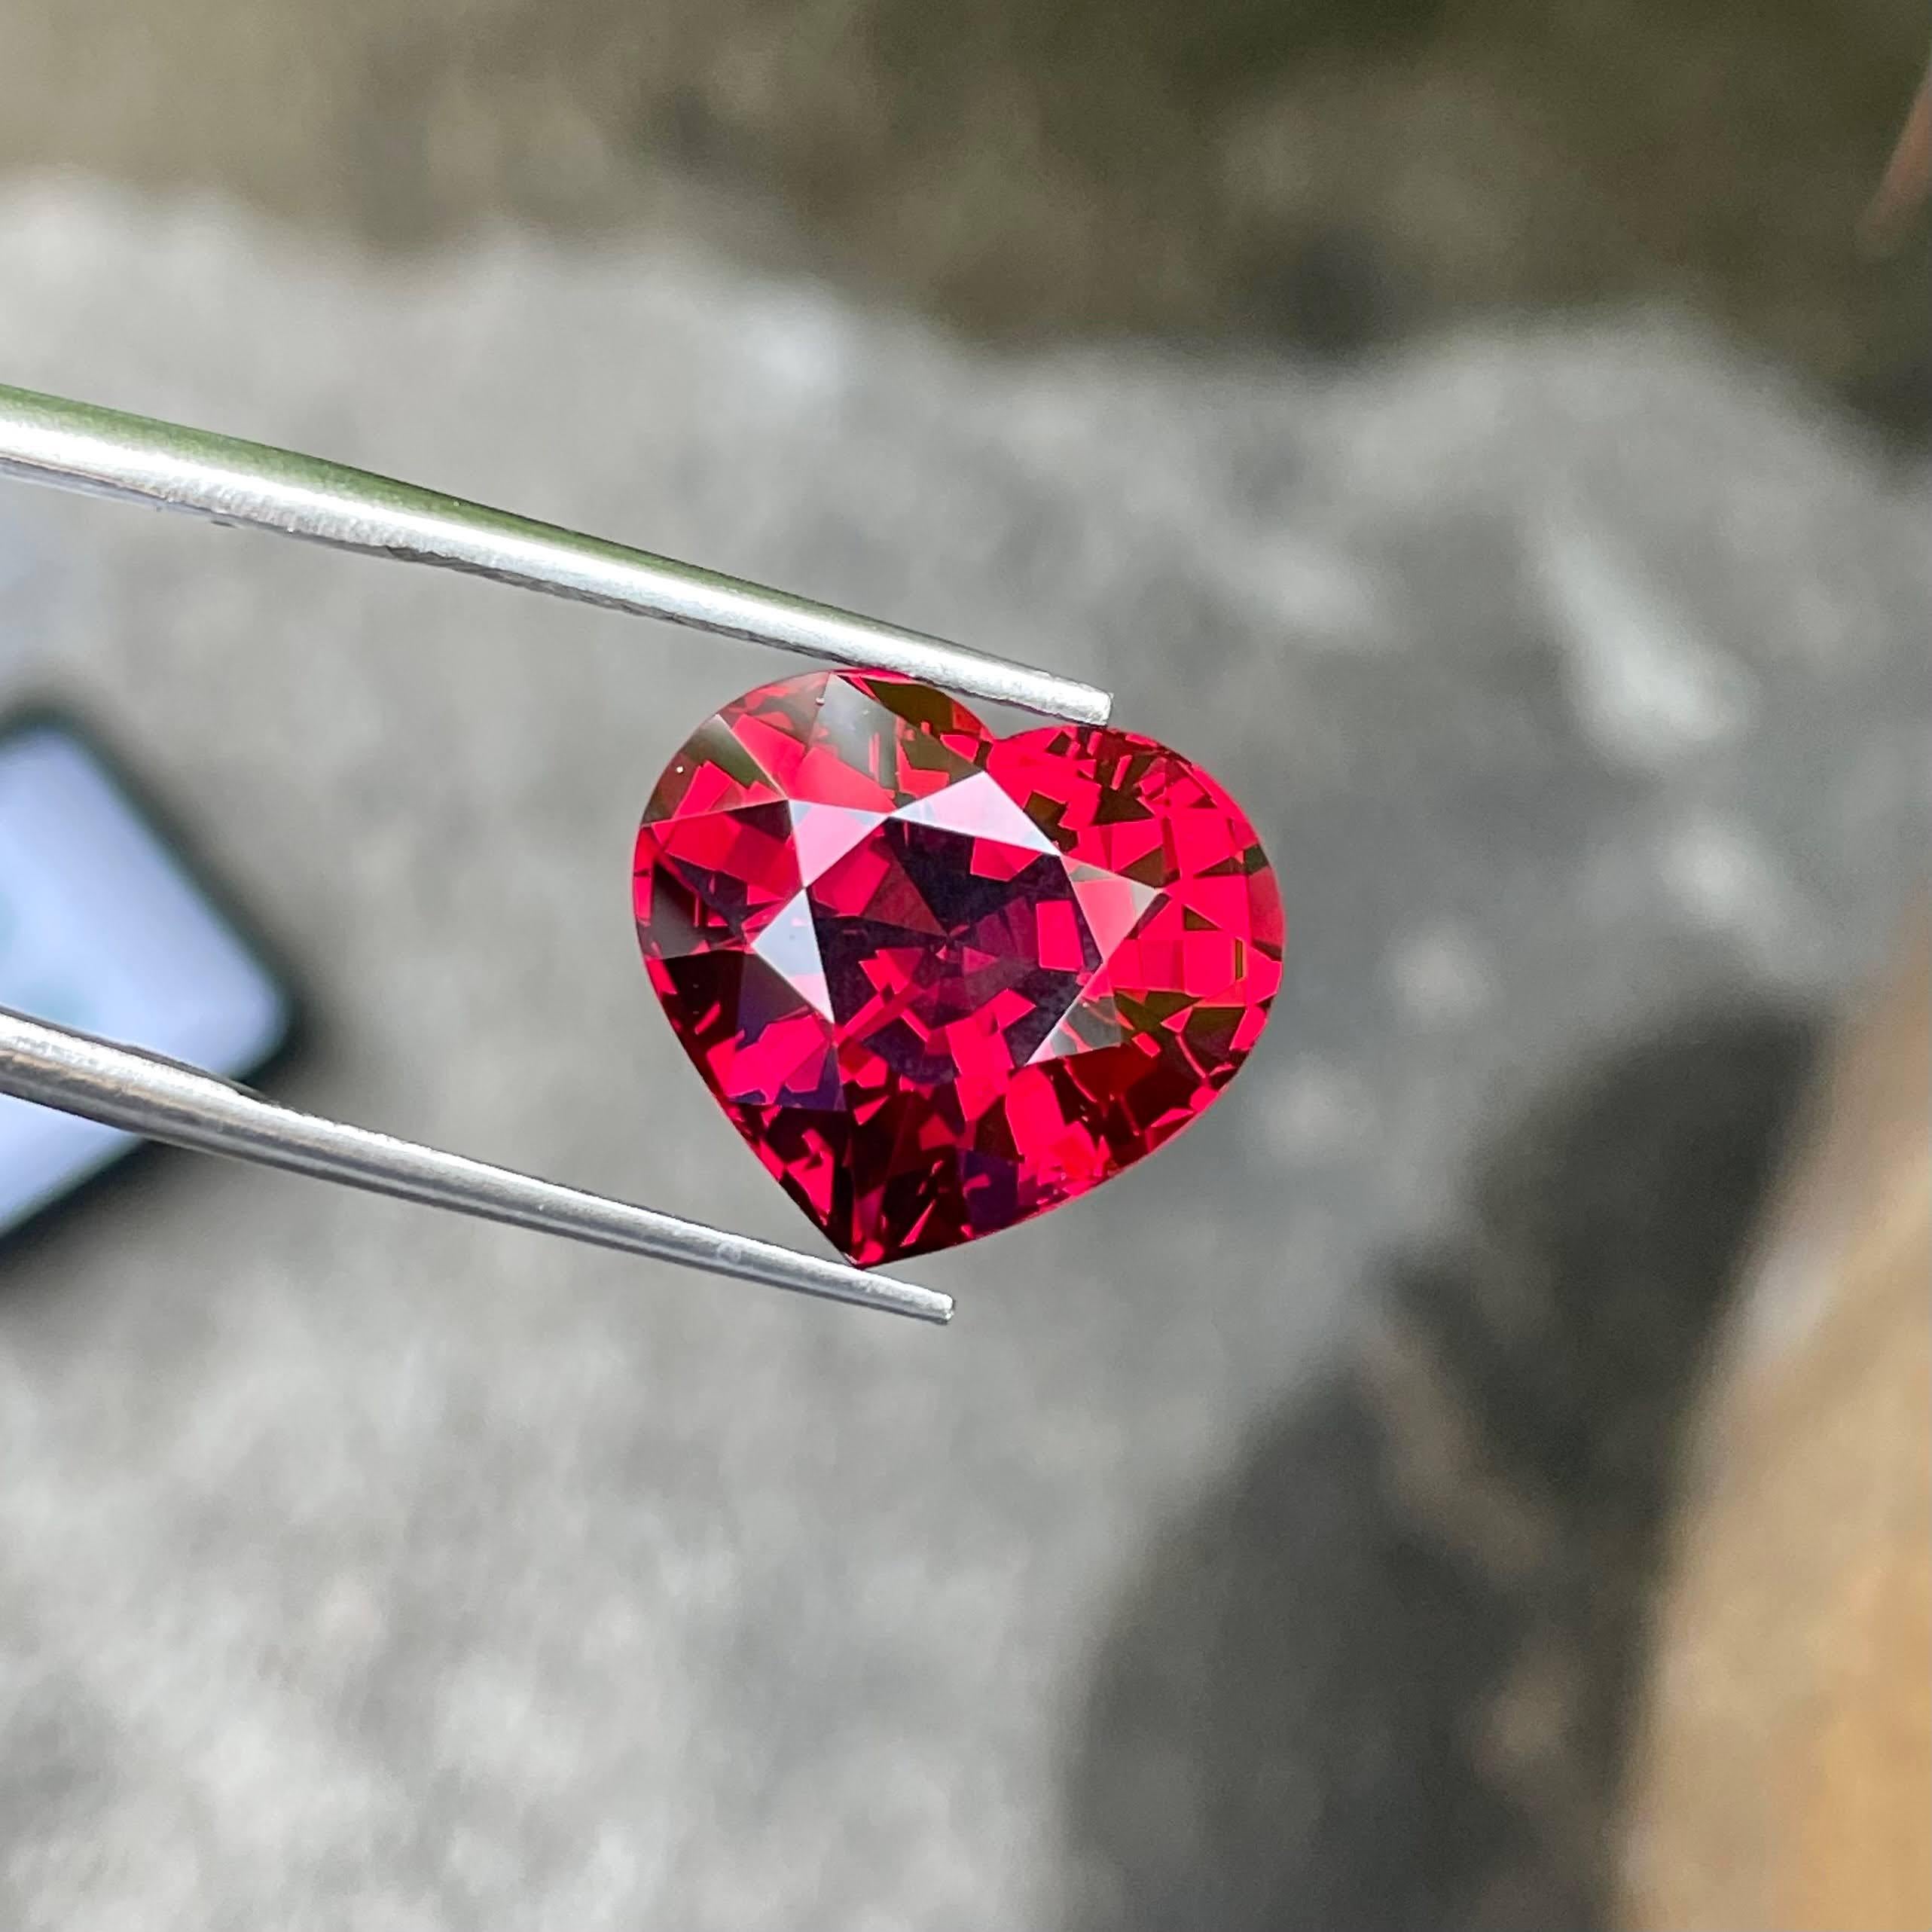 Weight 14.07 carats 
Dimensions 15.1x16.6x10.4 mm
Treatment none 
Origin Tanzania 
Clarity eye clean 
Shape heart 
Cut heart 




The 14.07 carats Heart Shaped Red Garnet is a mesmerizing natural Tanzanian gemstone that captivates with its deep,